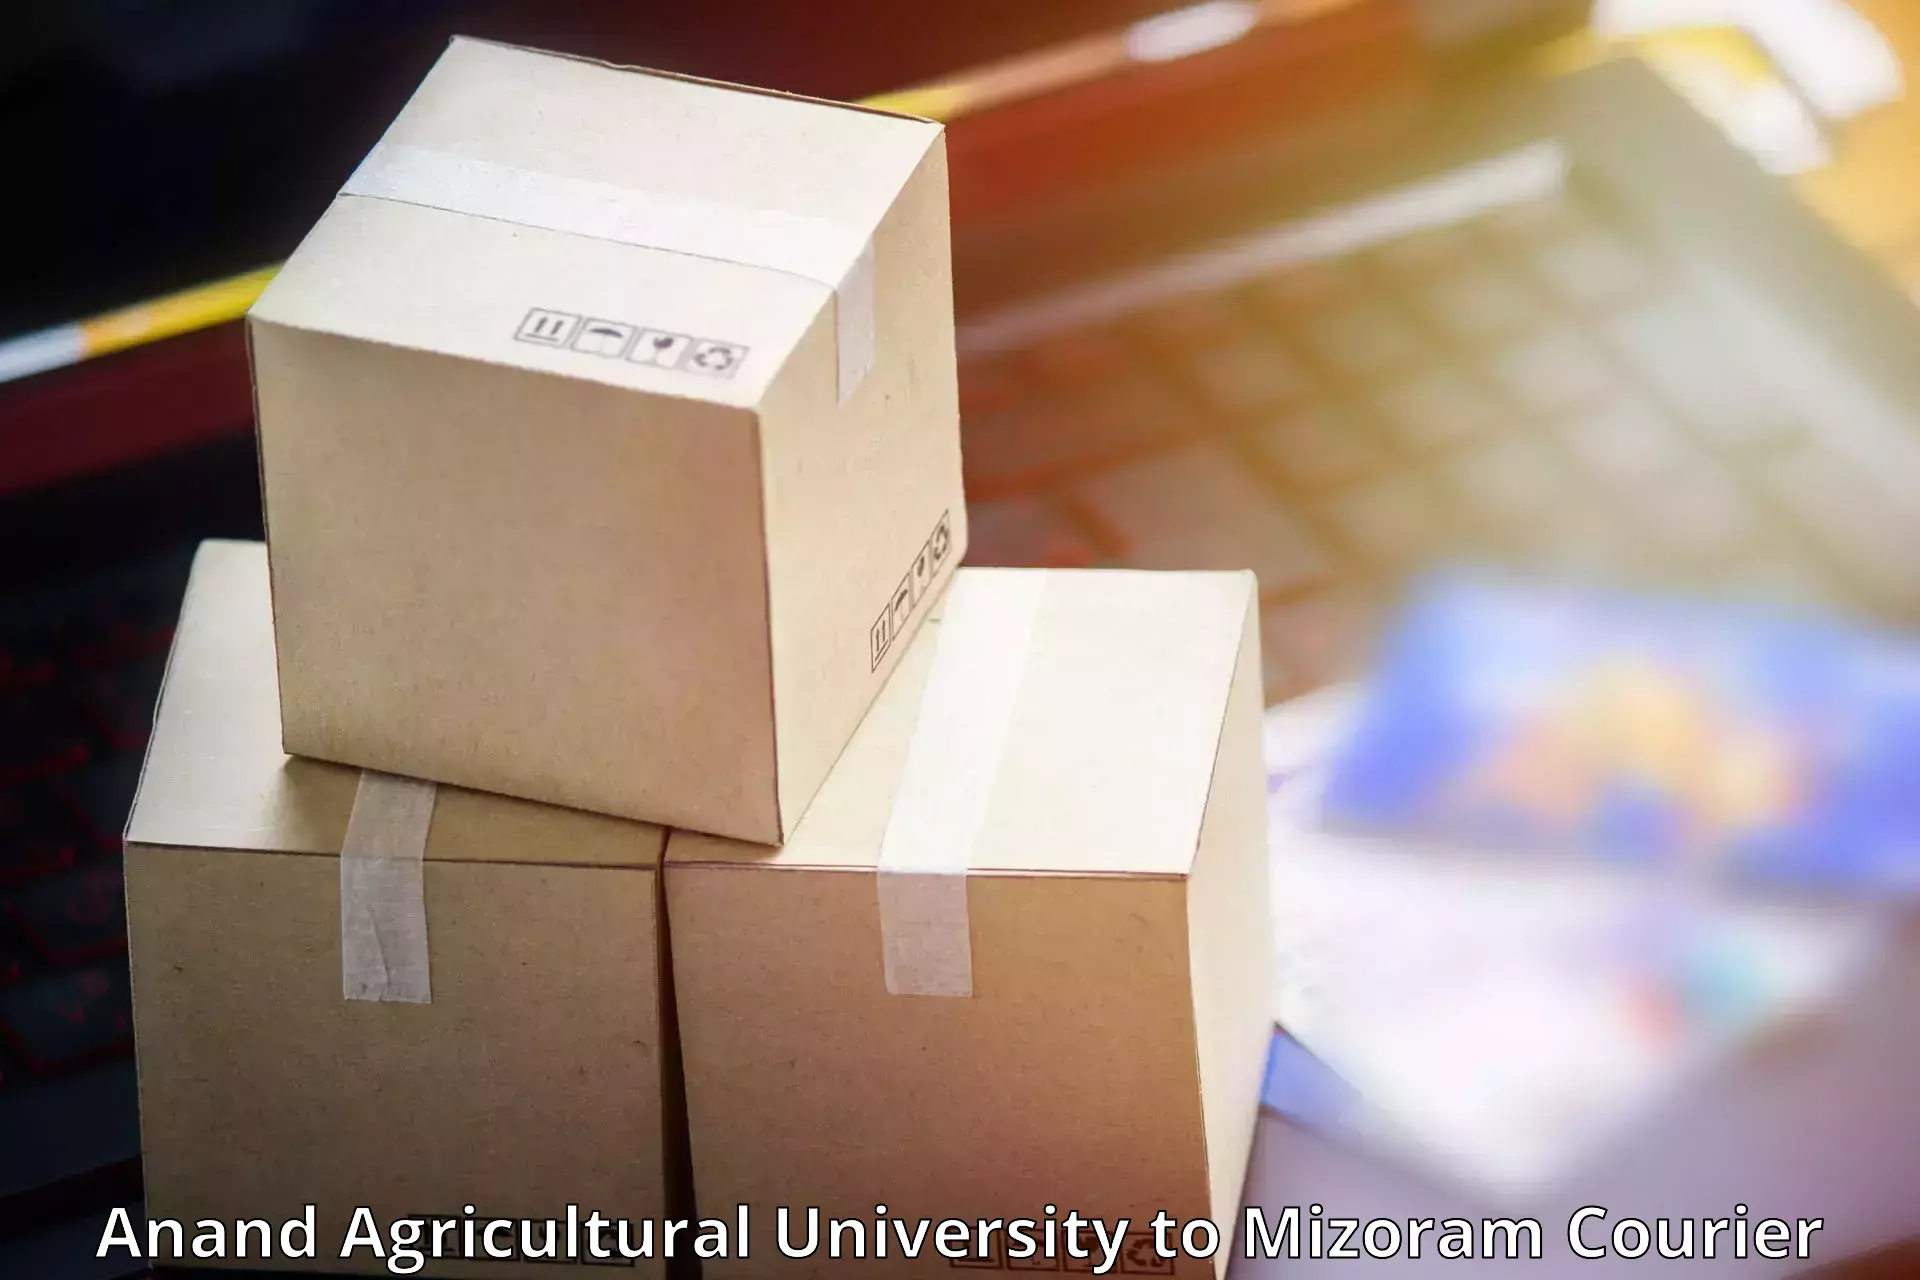 High-priority parcel service Anand Agricultural University to Mizoram